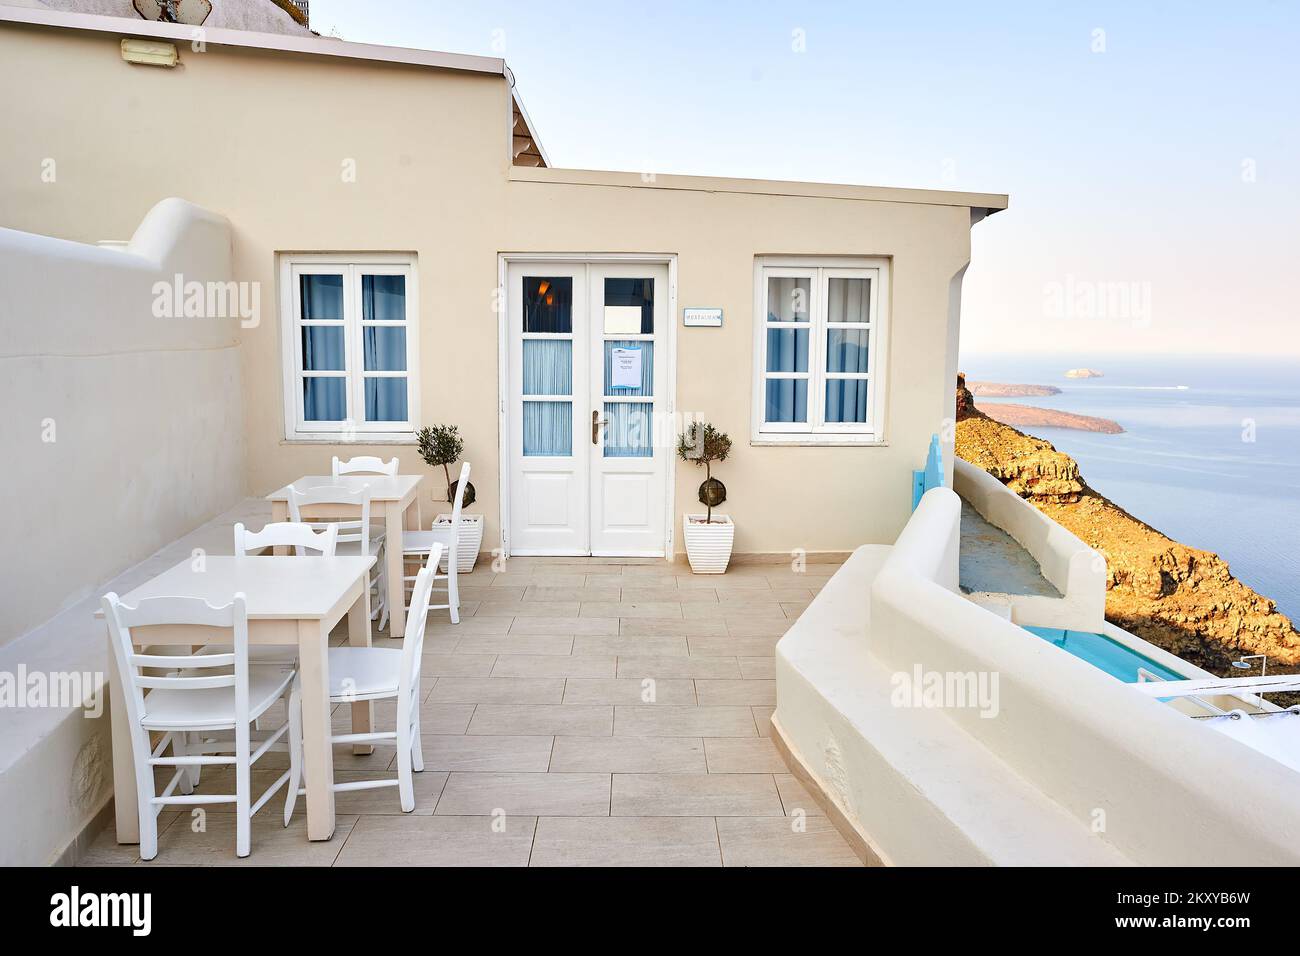 SANTORINI, GREECE - AUGUST 05, 2015: view of Andromeda Villas at morning. Andromeda Villas is an elegant hotel are situated in Imerovigli, Santorini i Stock Photo